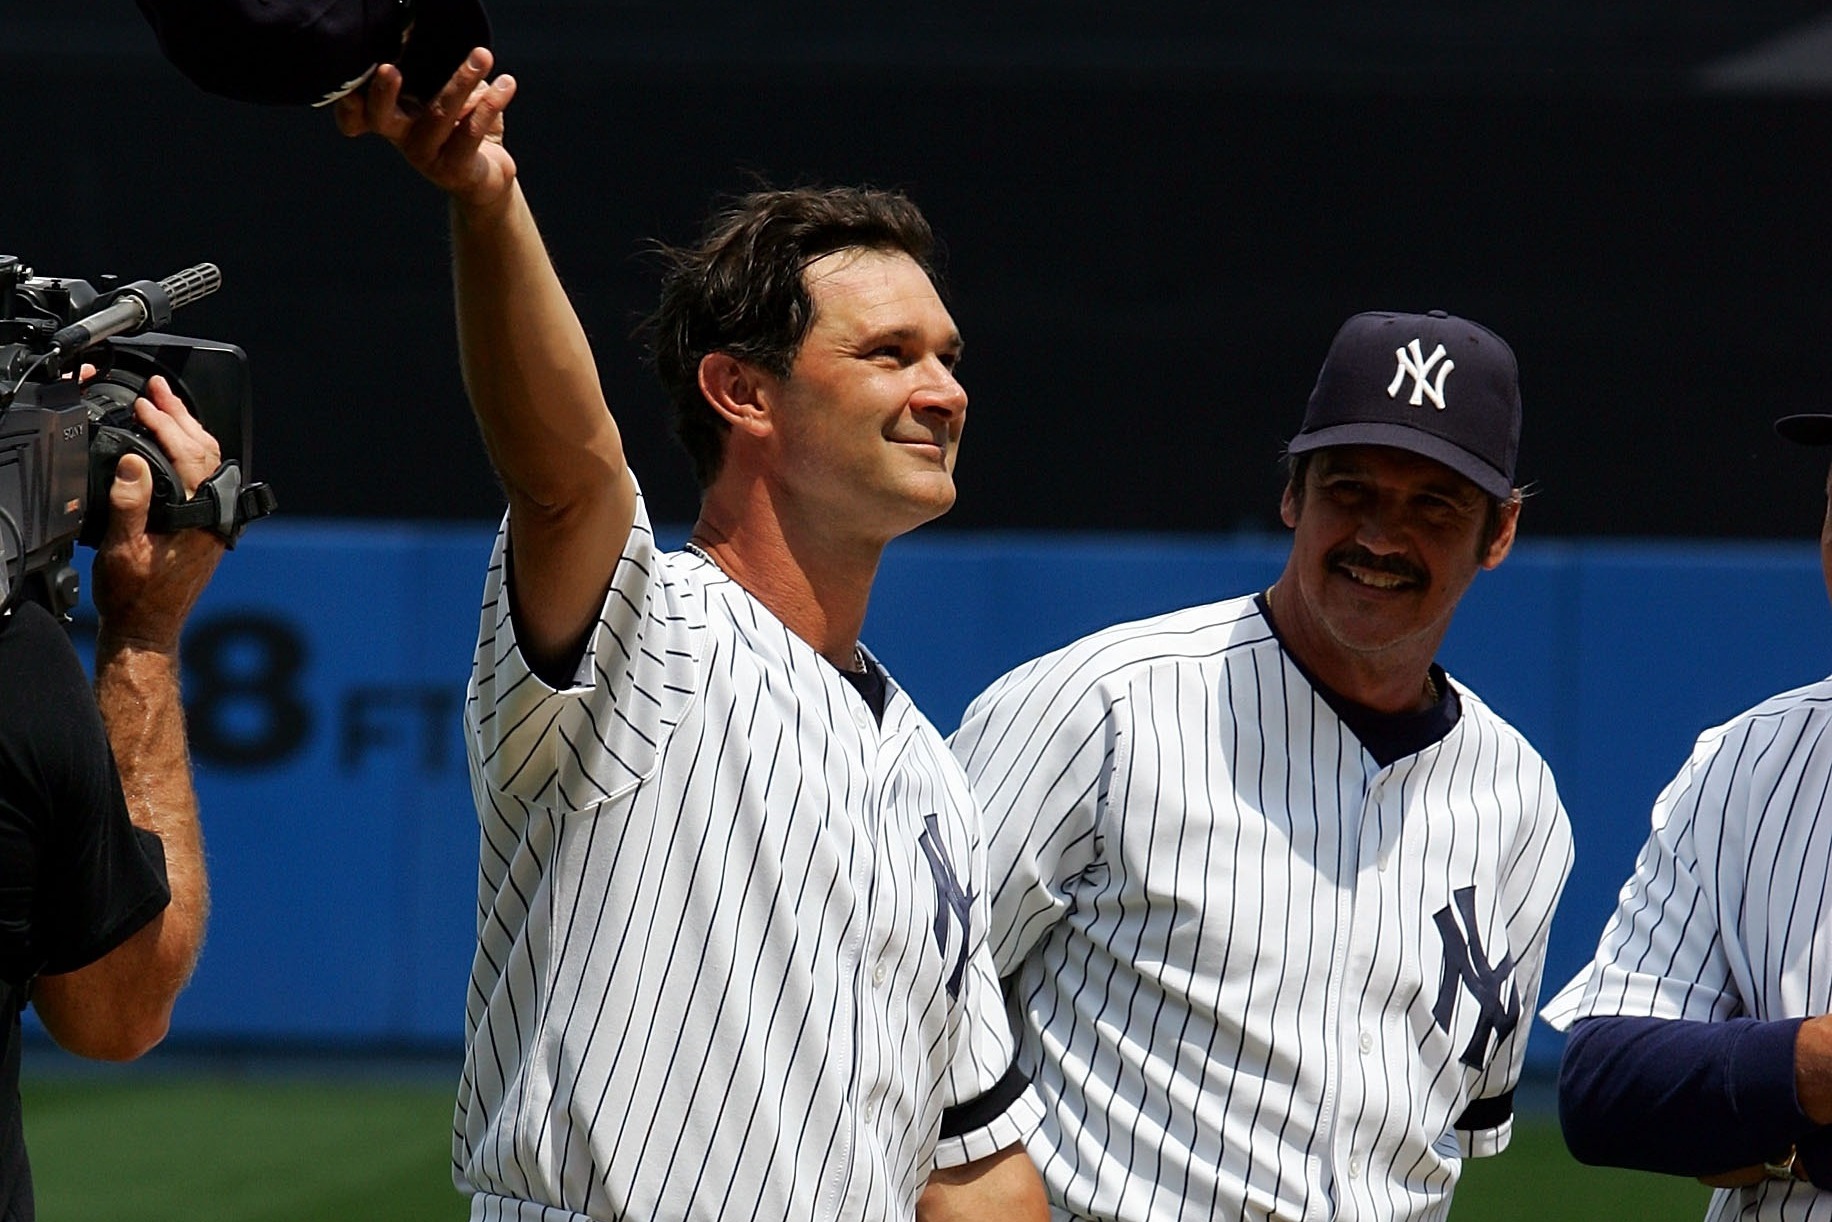 Pro Sports Outlook] Don Mattingly's #23 is the only number retired by the  Yankees that did not win a World Series with the franchise. The Yankees'  lifer put together some phenomenal seasons